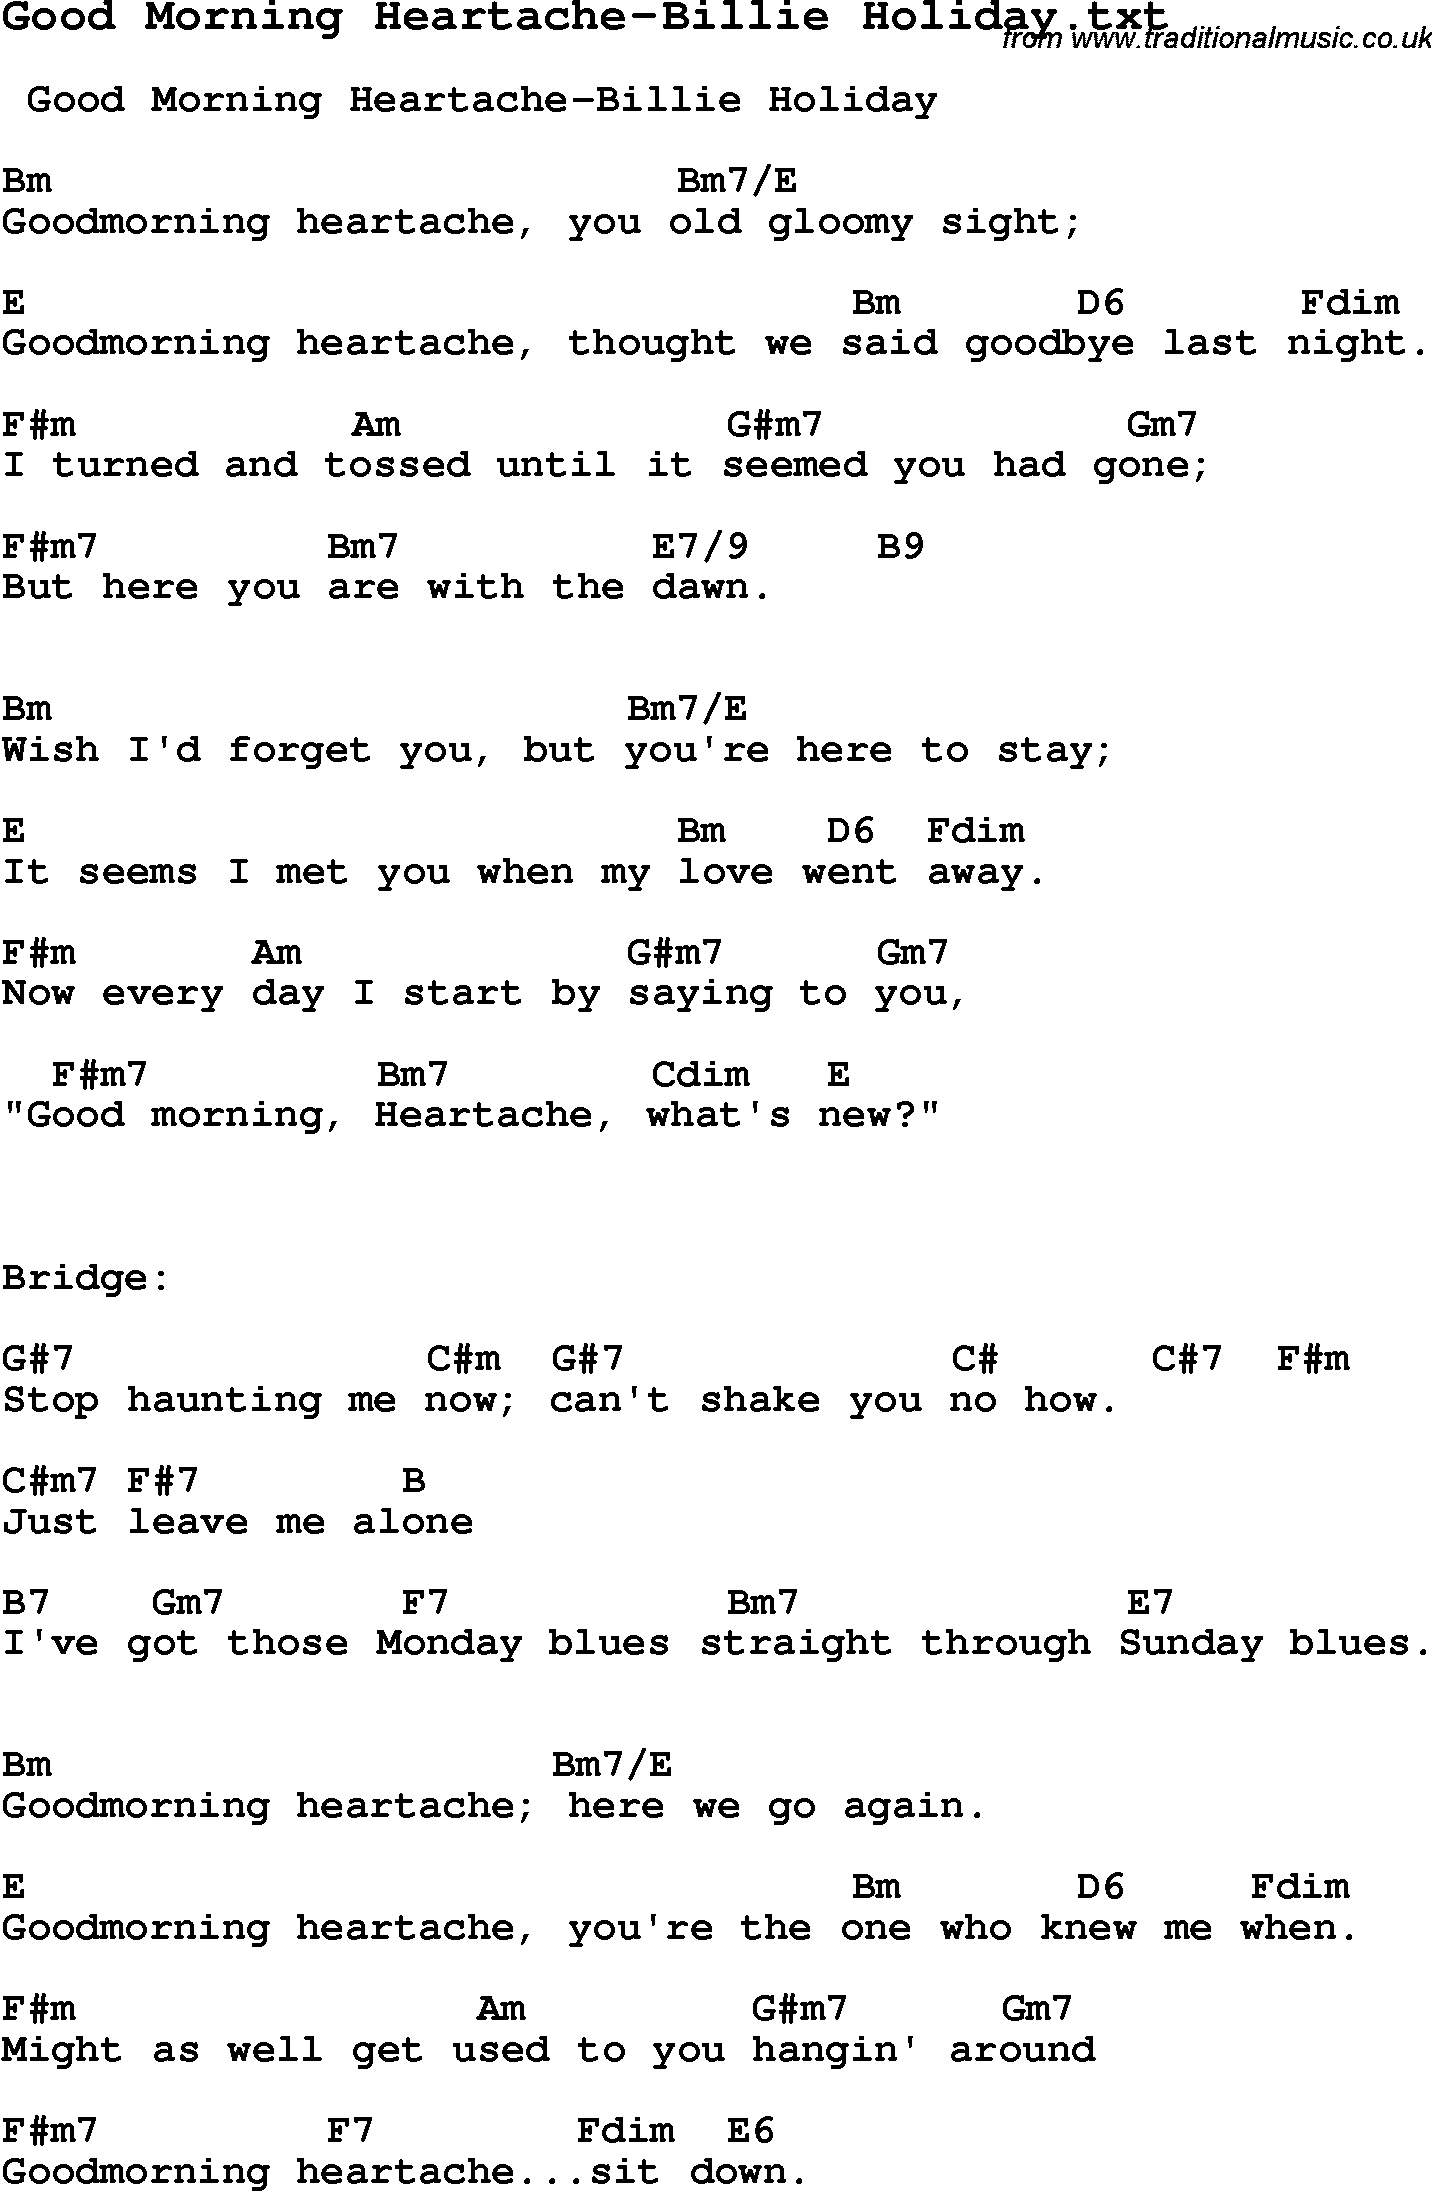 Sunday Morning Chords Jazz Song Good Morning Heartache Billie Holiday With Chords Tabs